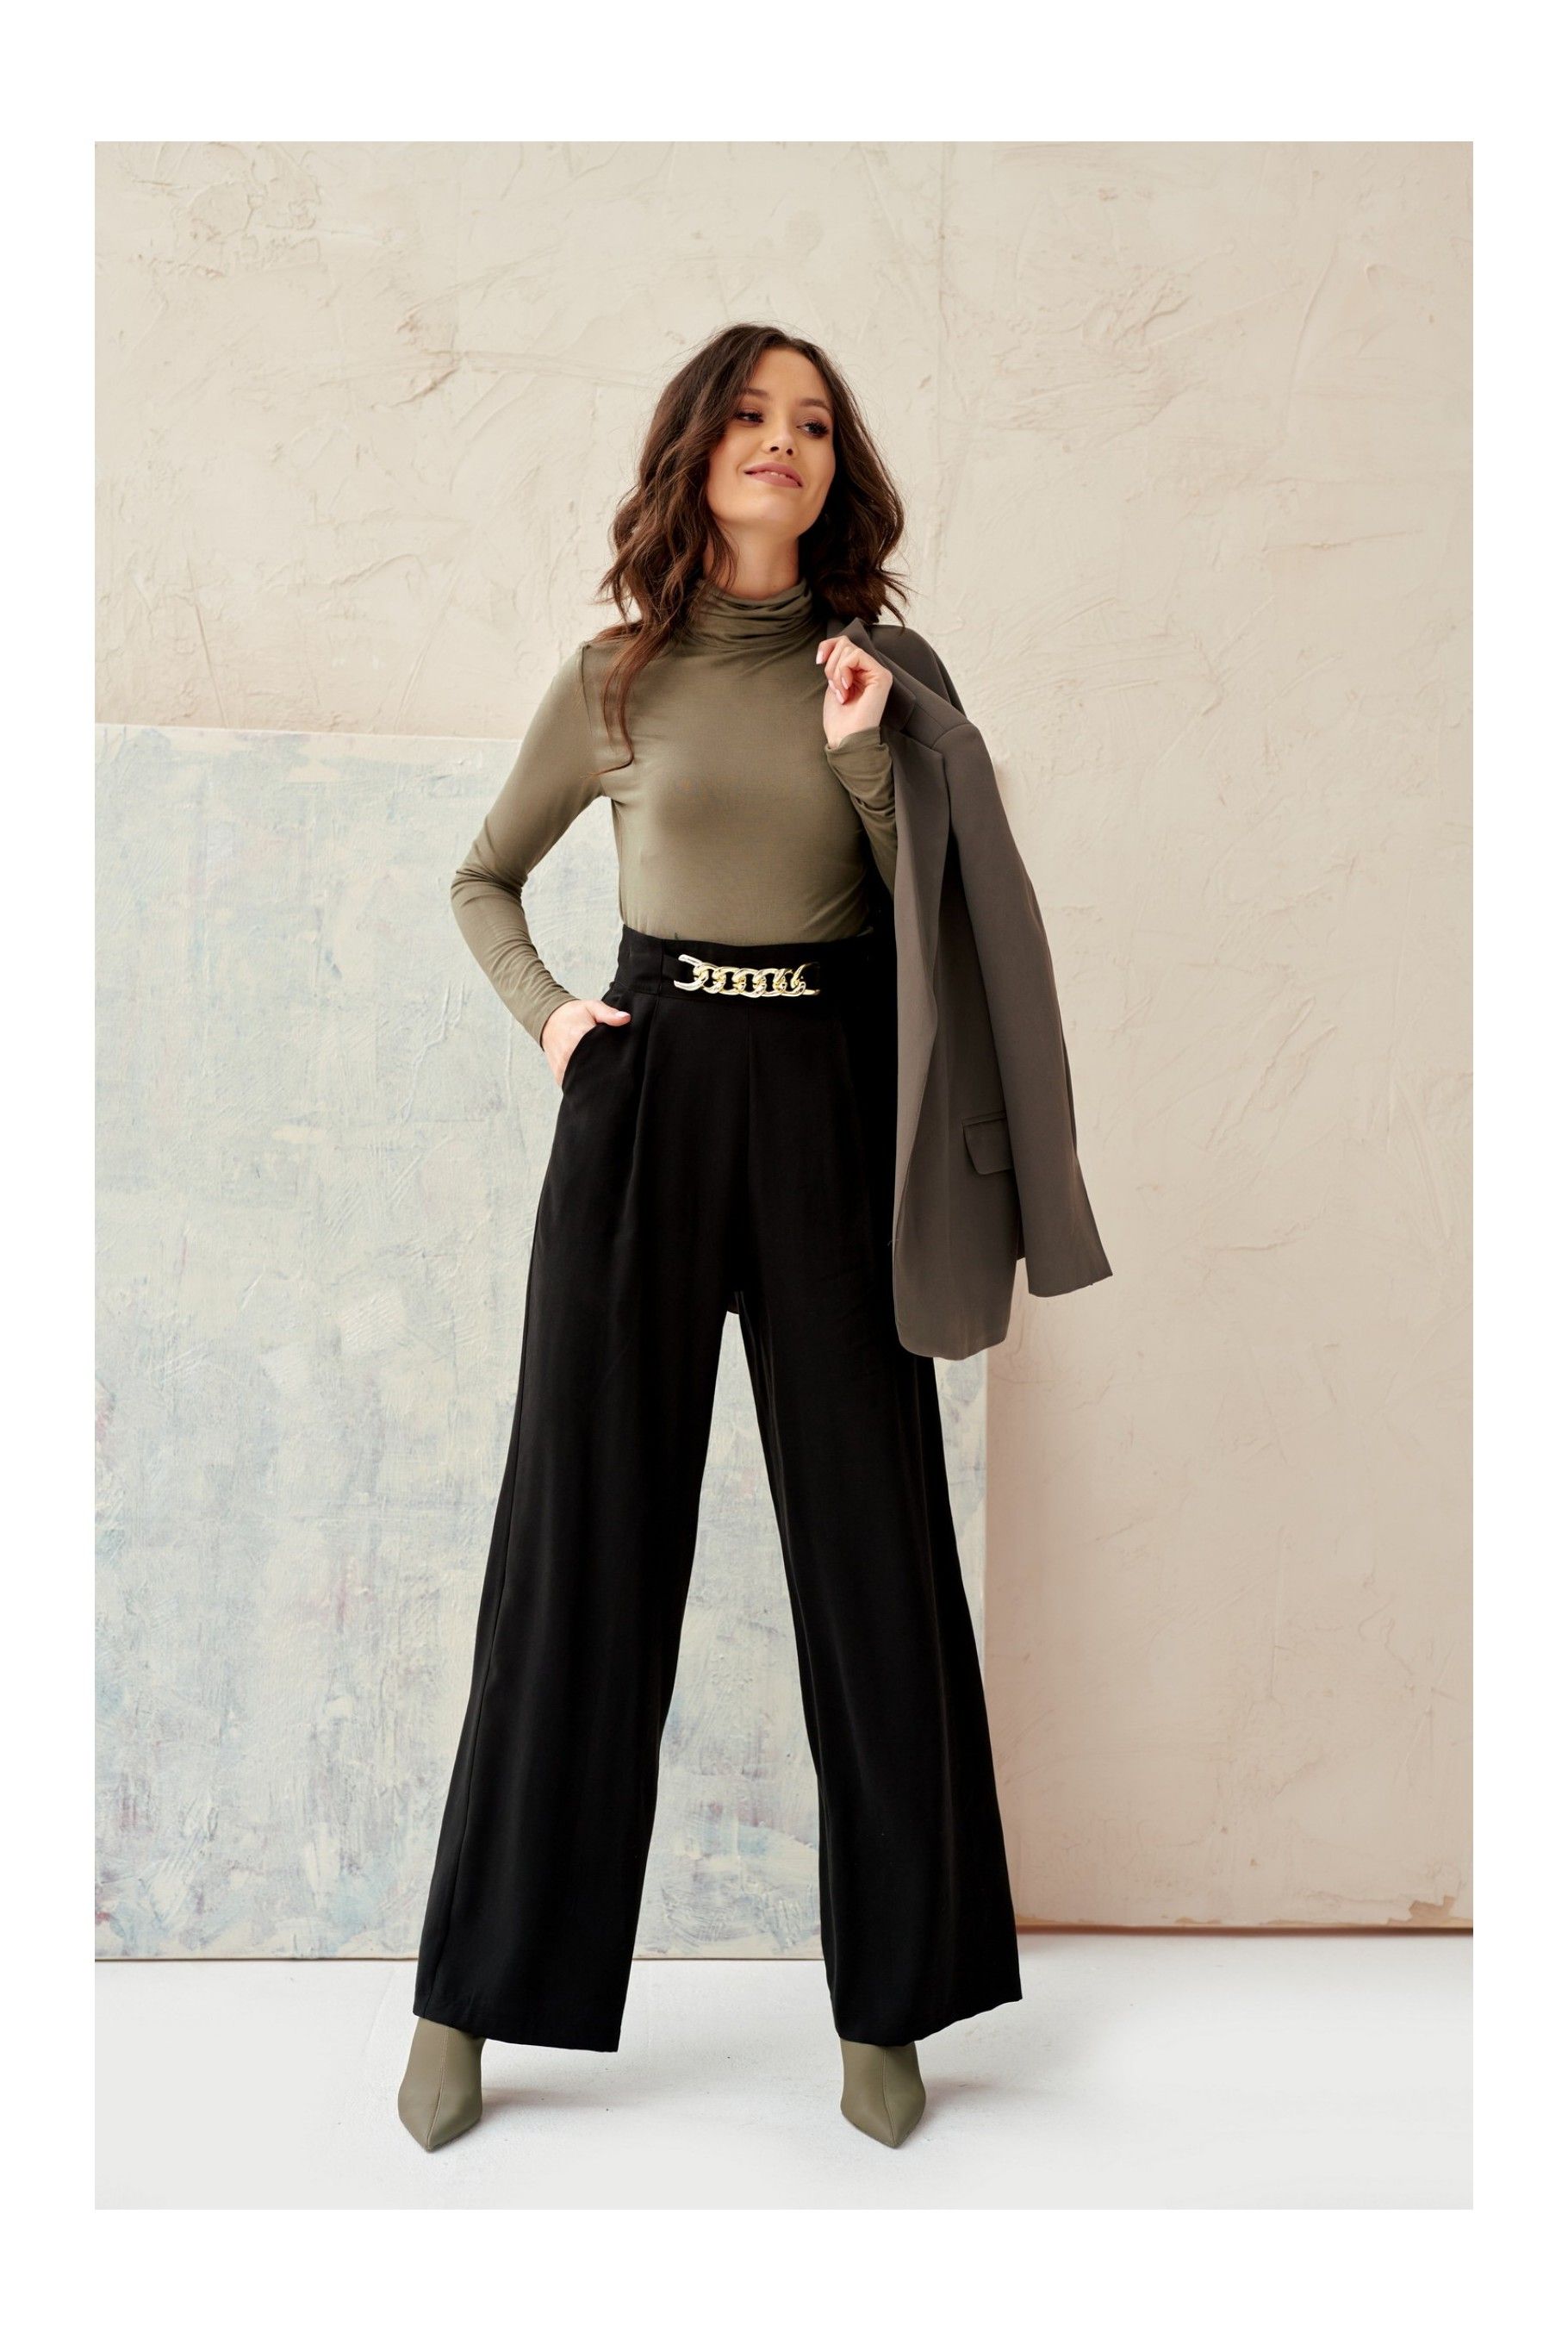 Audrey - wide women's trousers with a decorative chain CZA